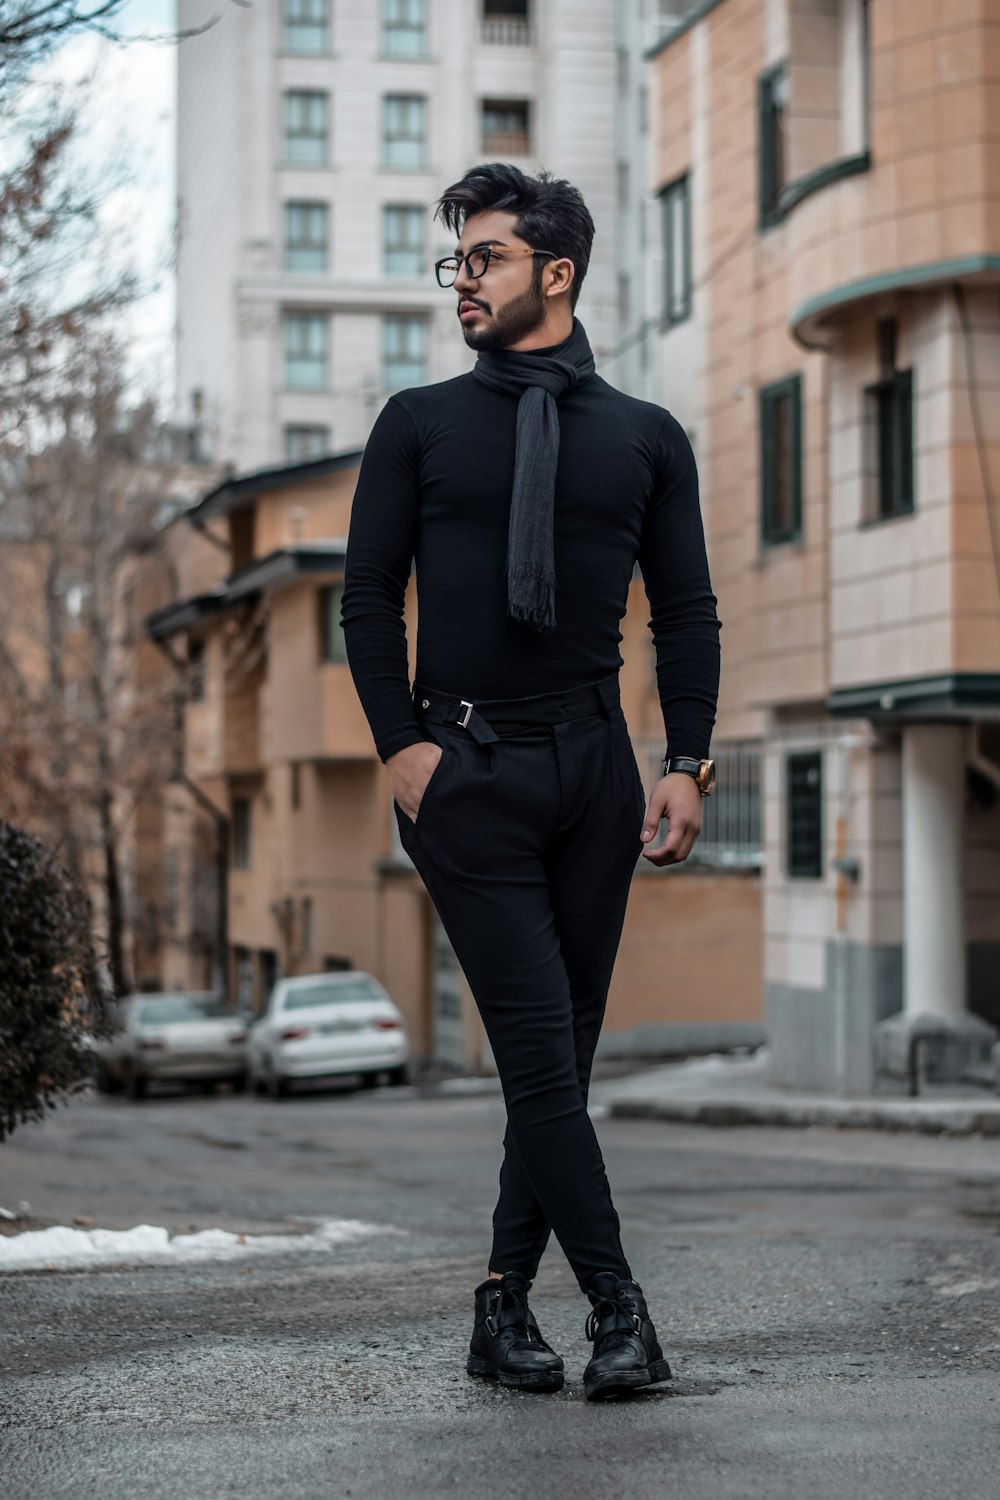 Man in black dress shirt, necktie, and pants standing on street photo –  Free Person Image on Unsplash